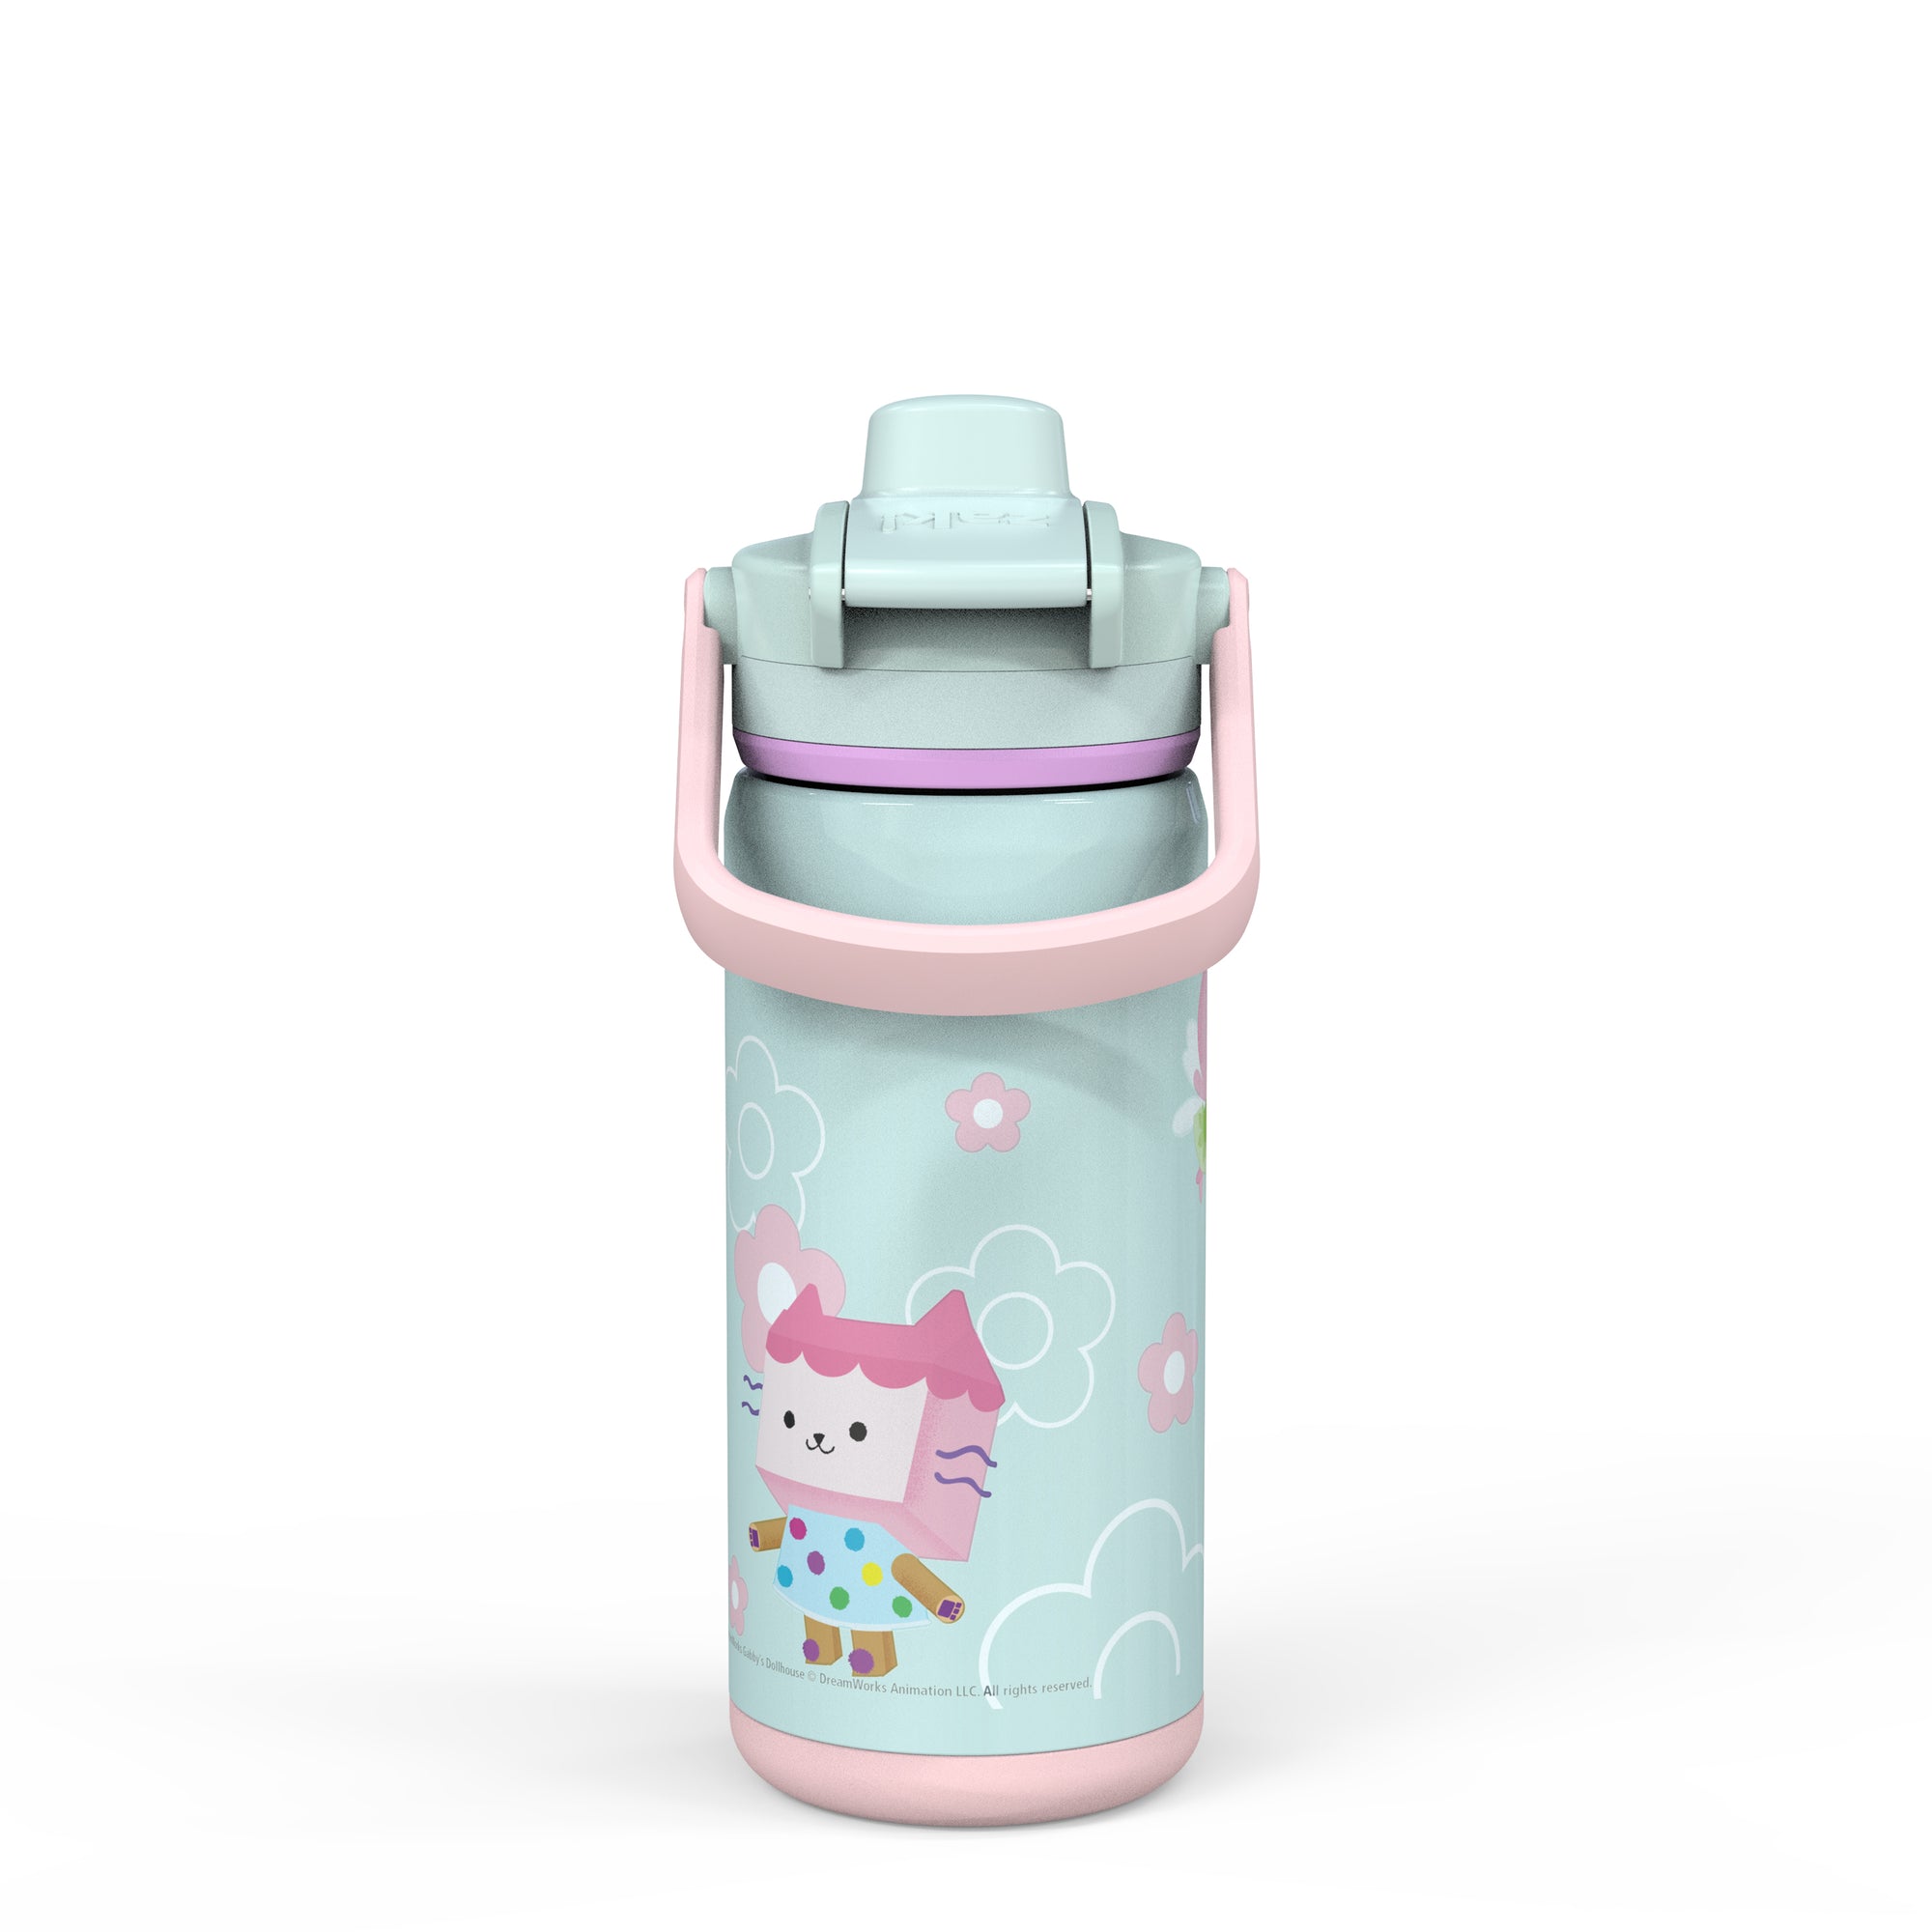 Gabby's Dollhouse Beacon Stainless Steel Insulated Kids Water Bottle with Covered Spout, 14 Ounces